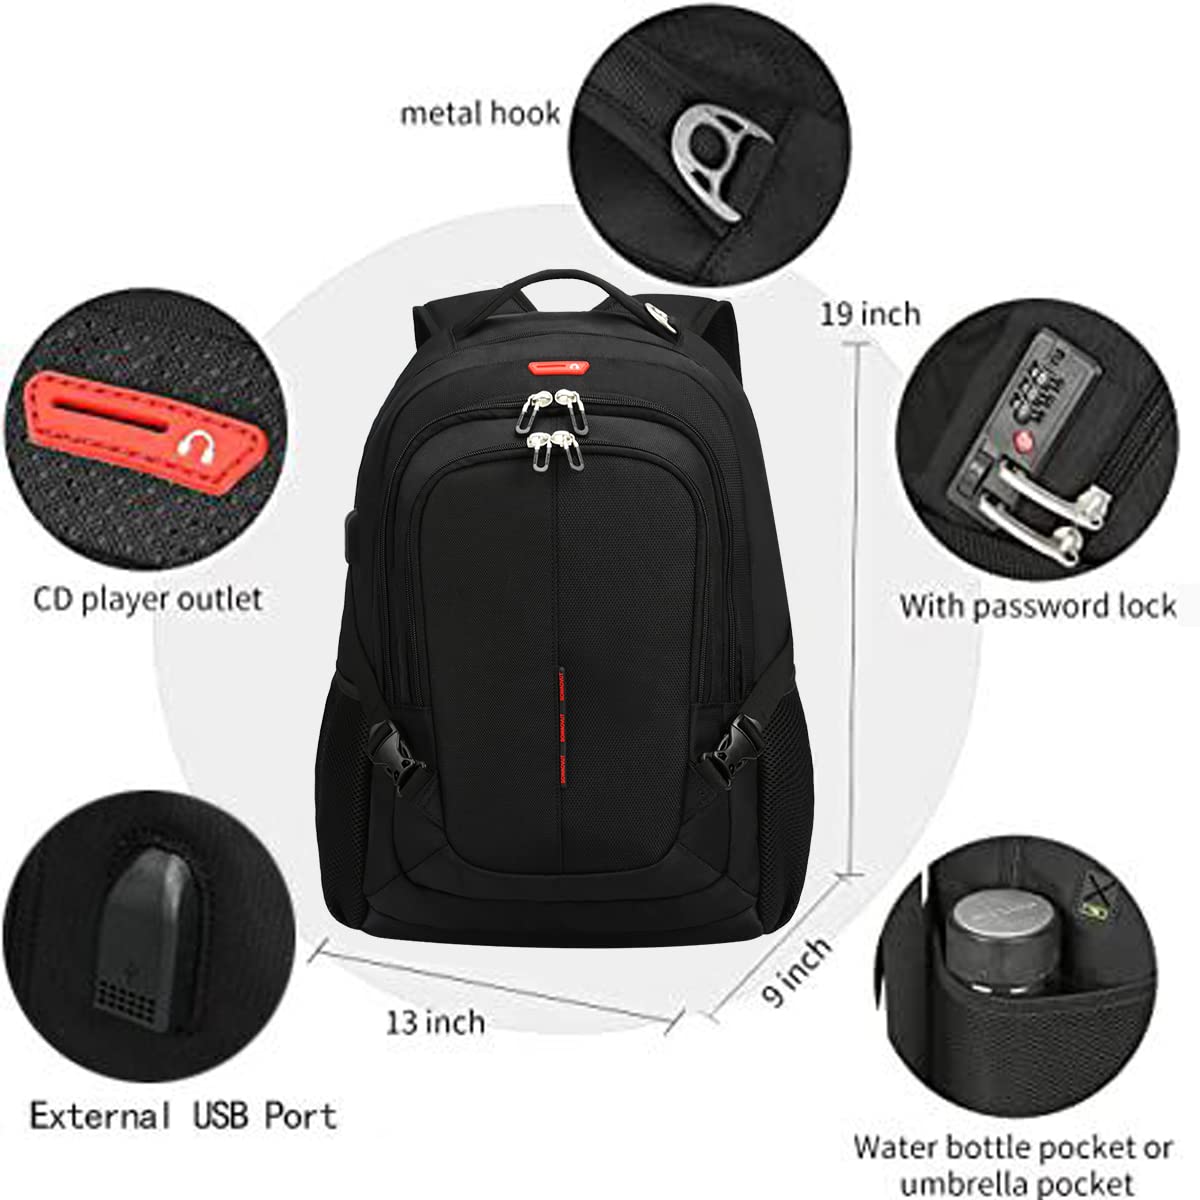 Sowaovut Travel Laptop Backpack Anti-Theft Bag with usb Charging Port and Password Lock Fit 15.6 Inch Laptops for Men Women